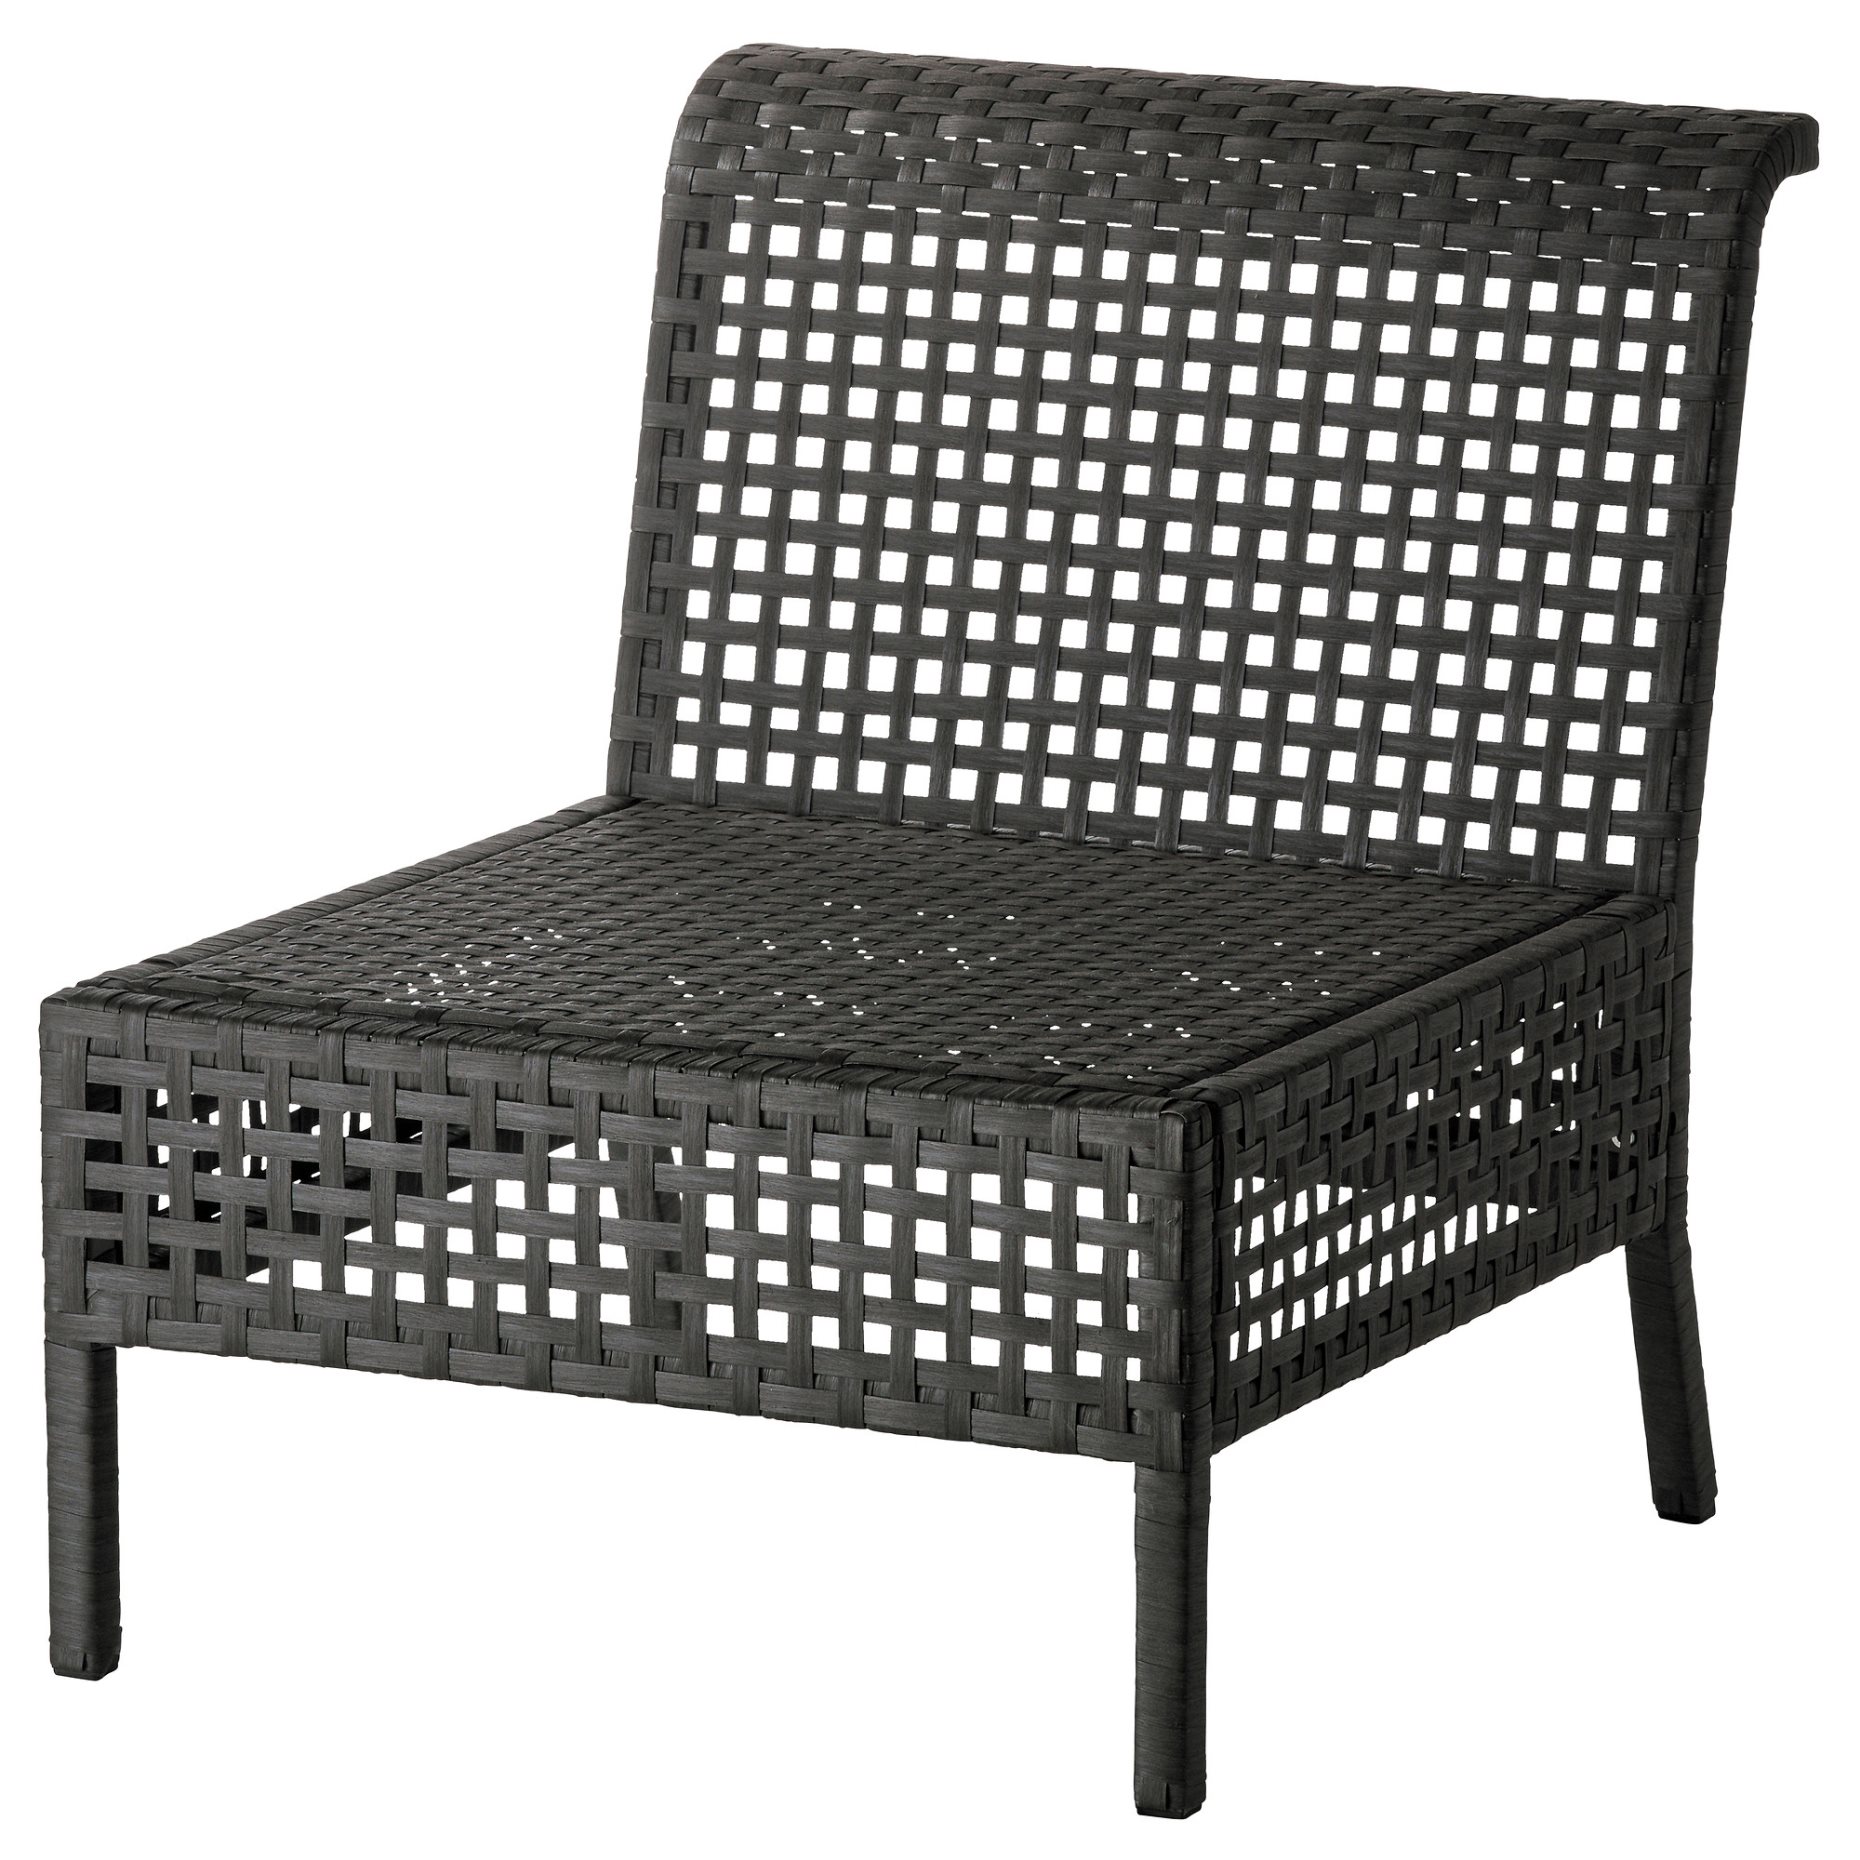 KUNGSHOLMEN, one-seat section, outdoor, 502.670.49